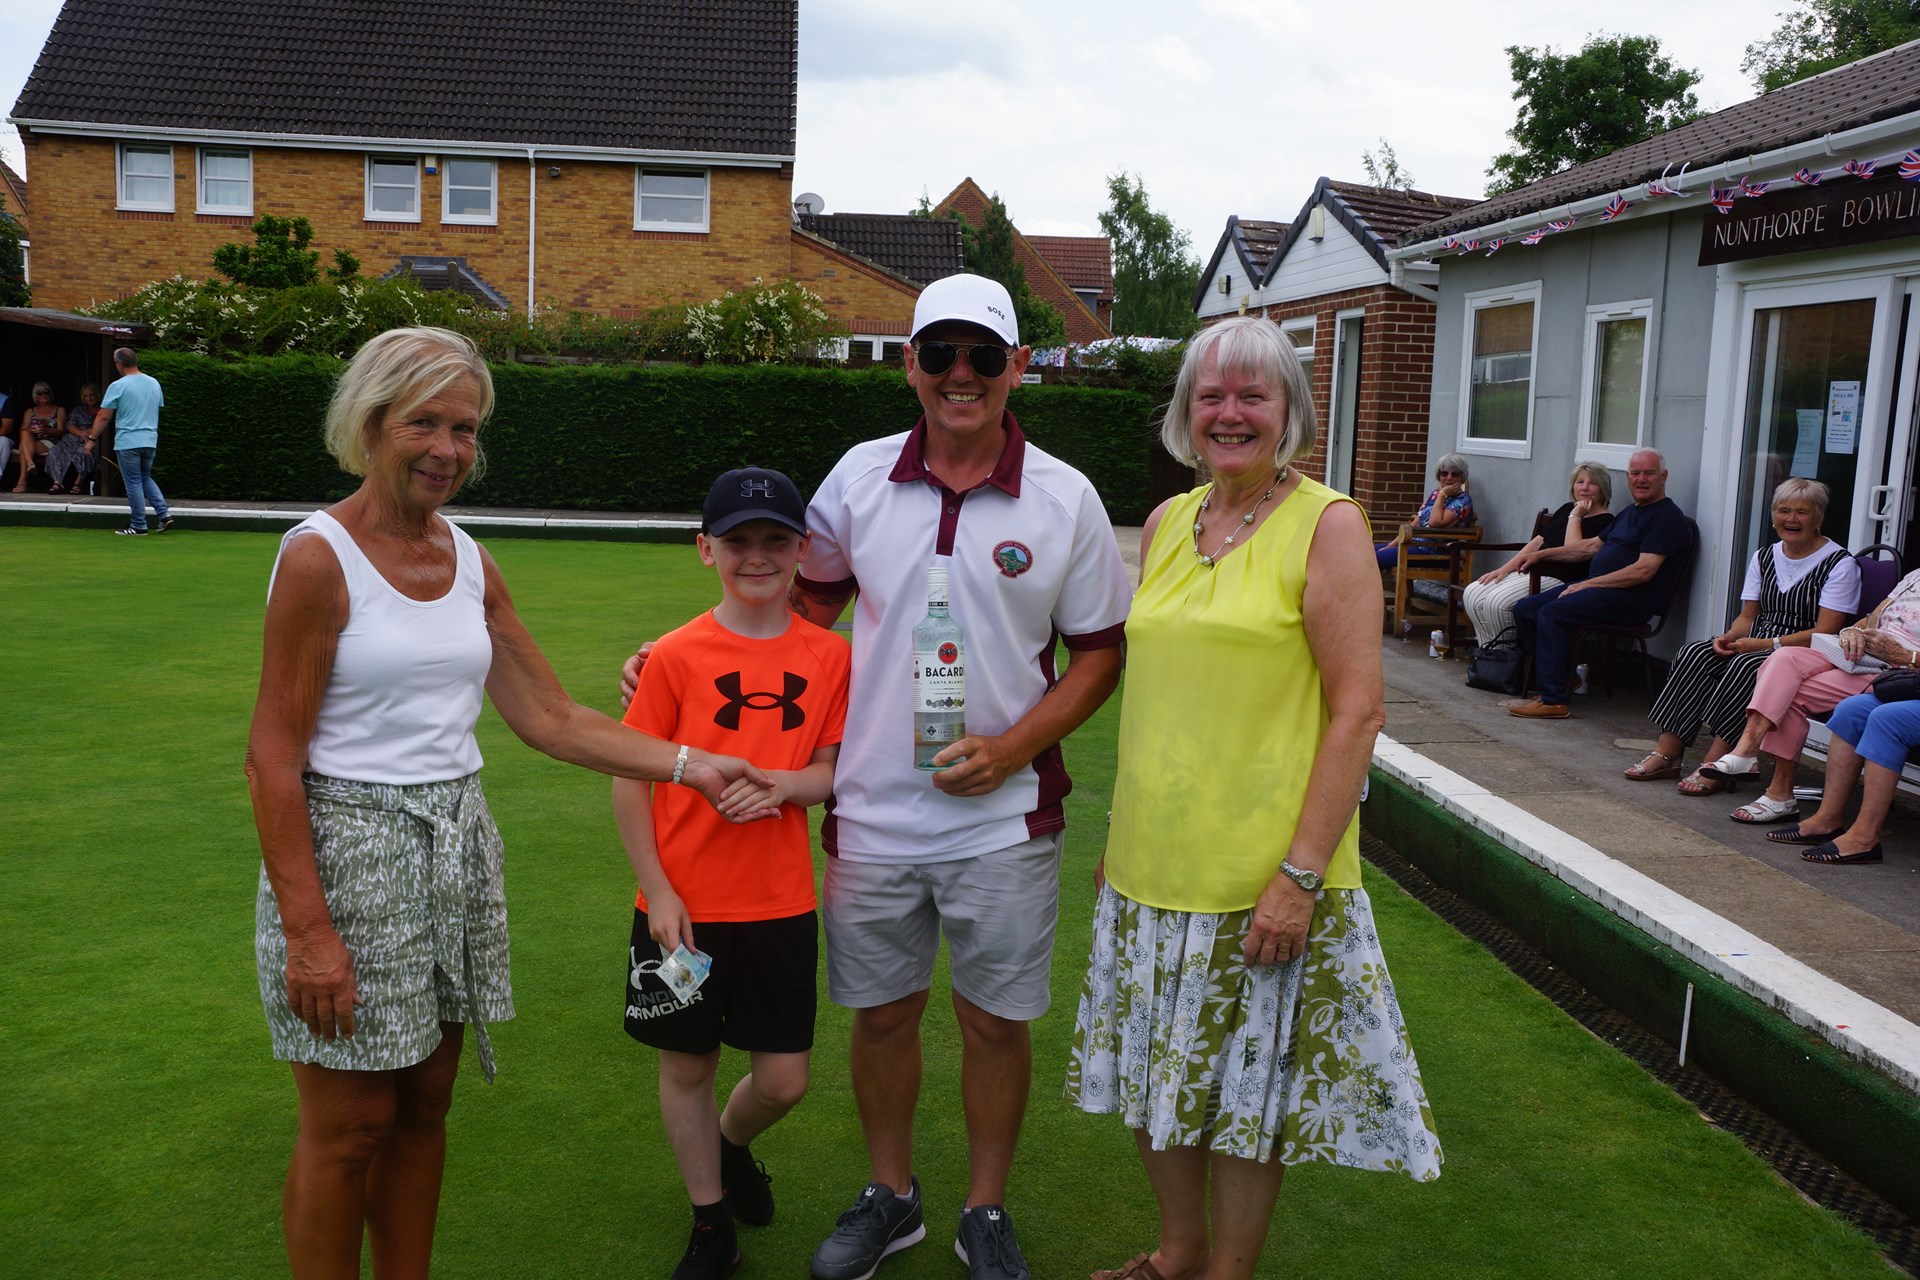 Congratulations Jack Moore. Our youngest ever Spider winner!